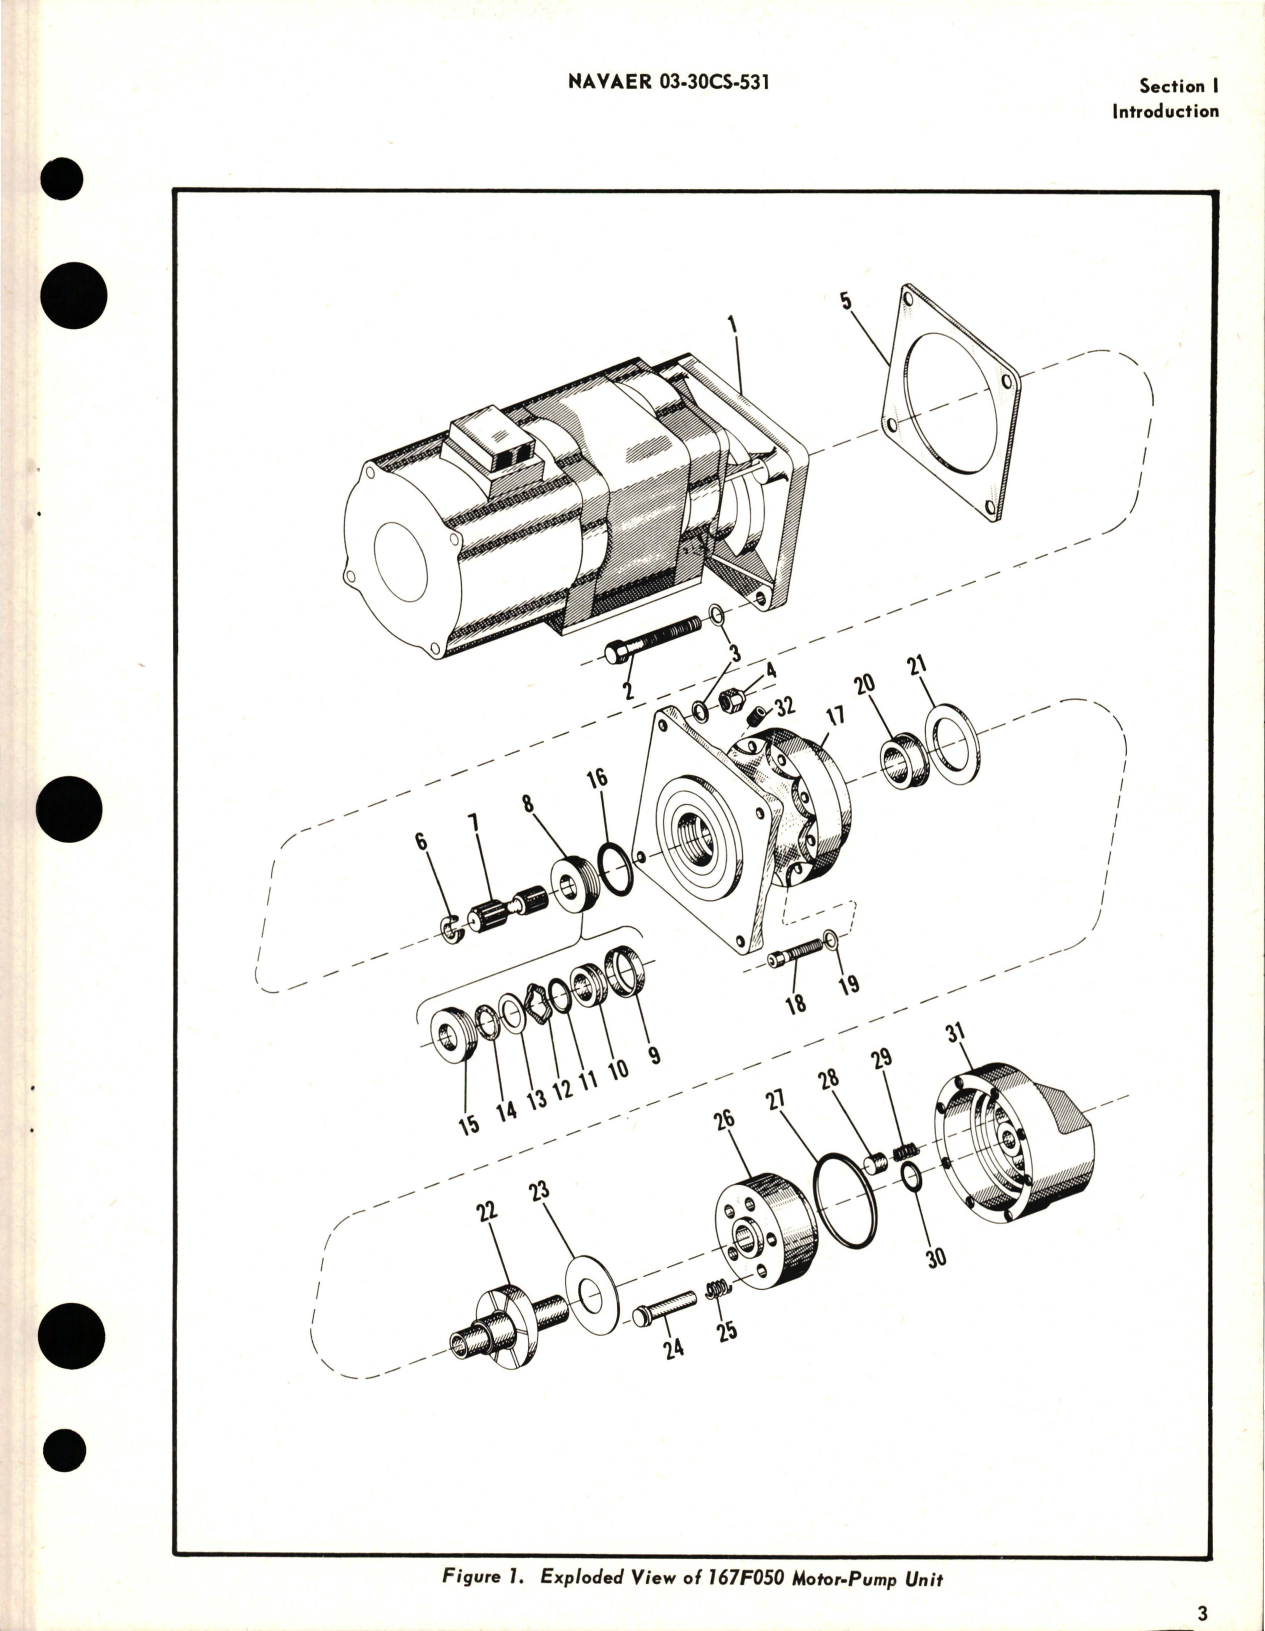 Sample page 7 from AirCorps Library document: Illustrated Parts Breakdown for Stratopower Hydraulic Pump